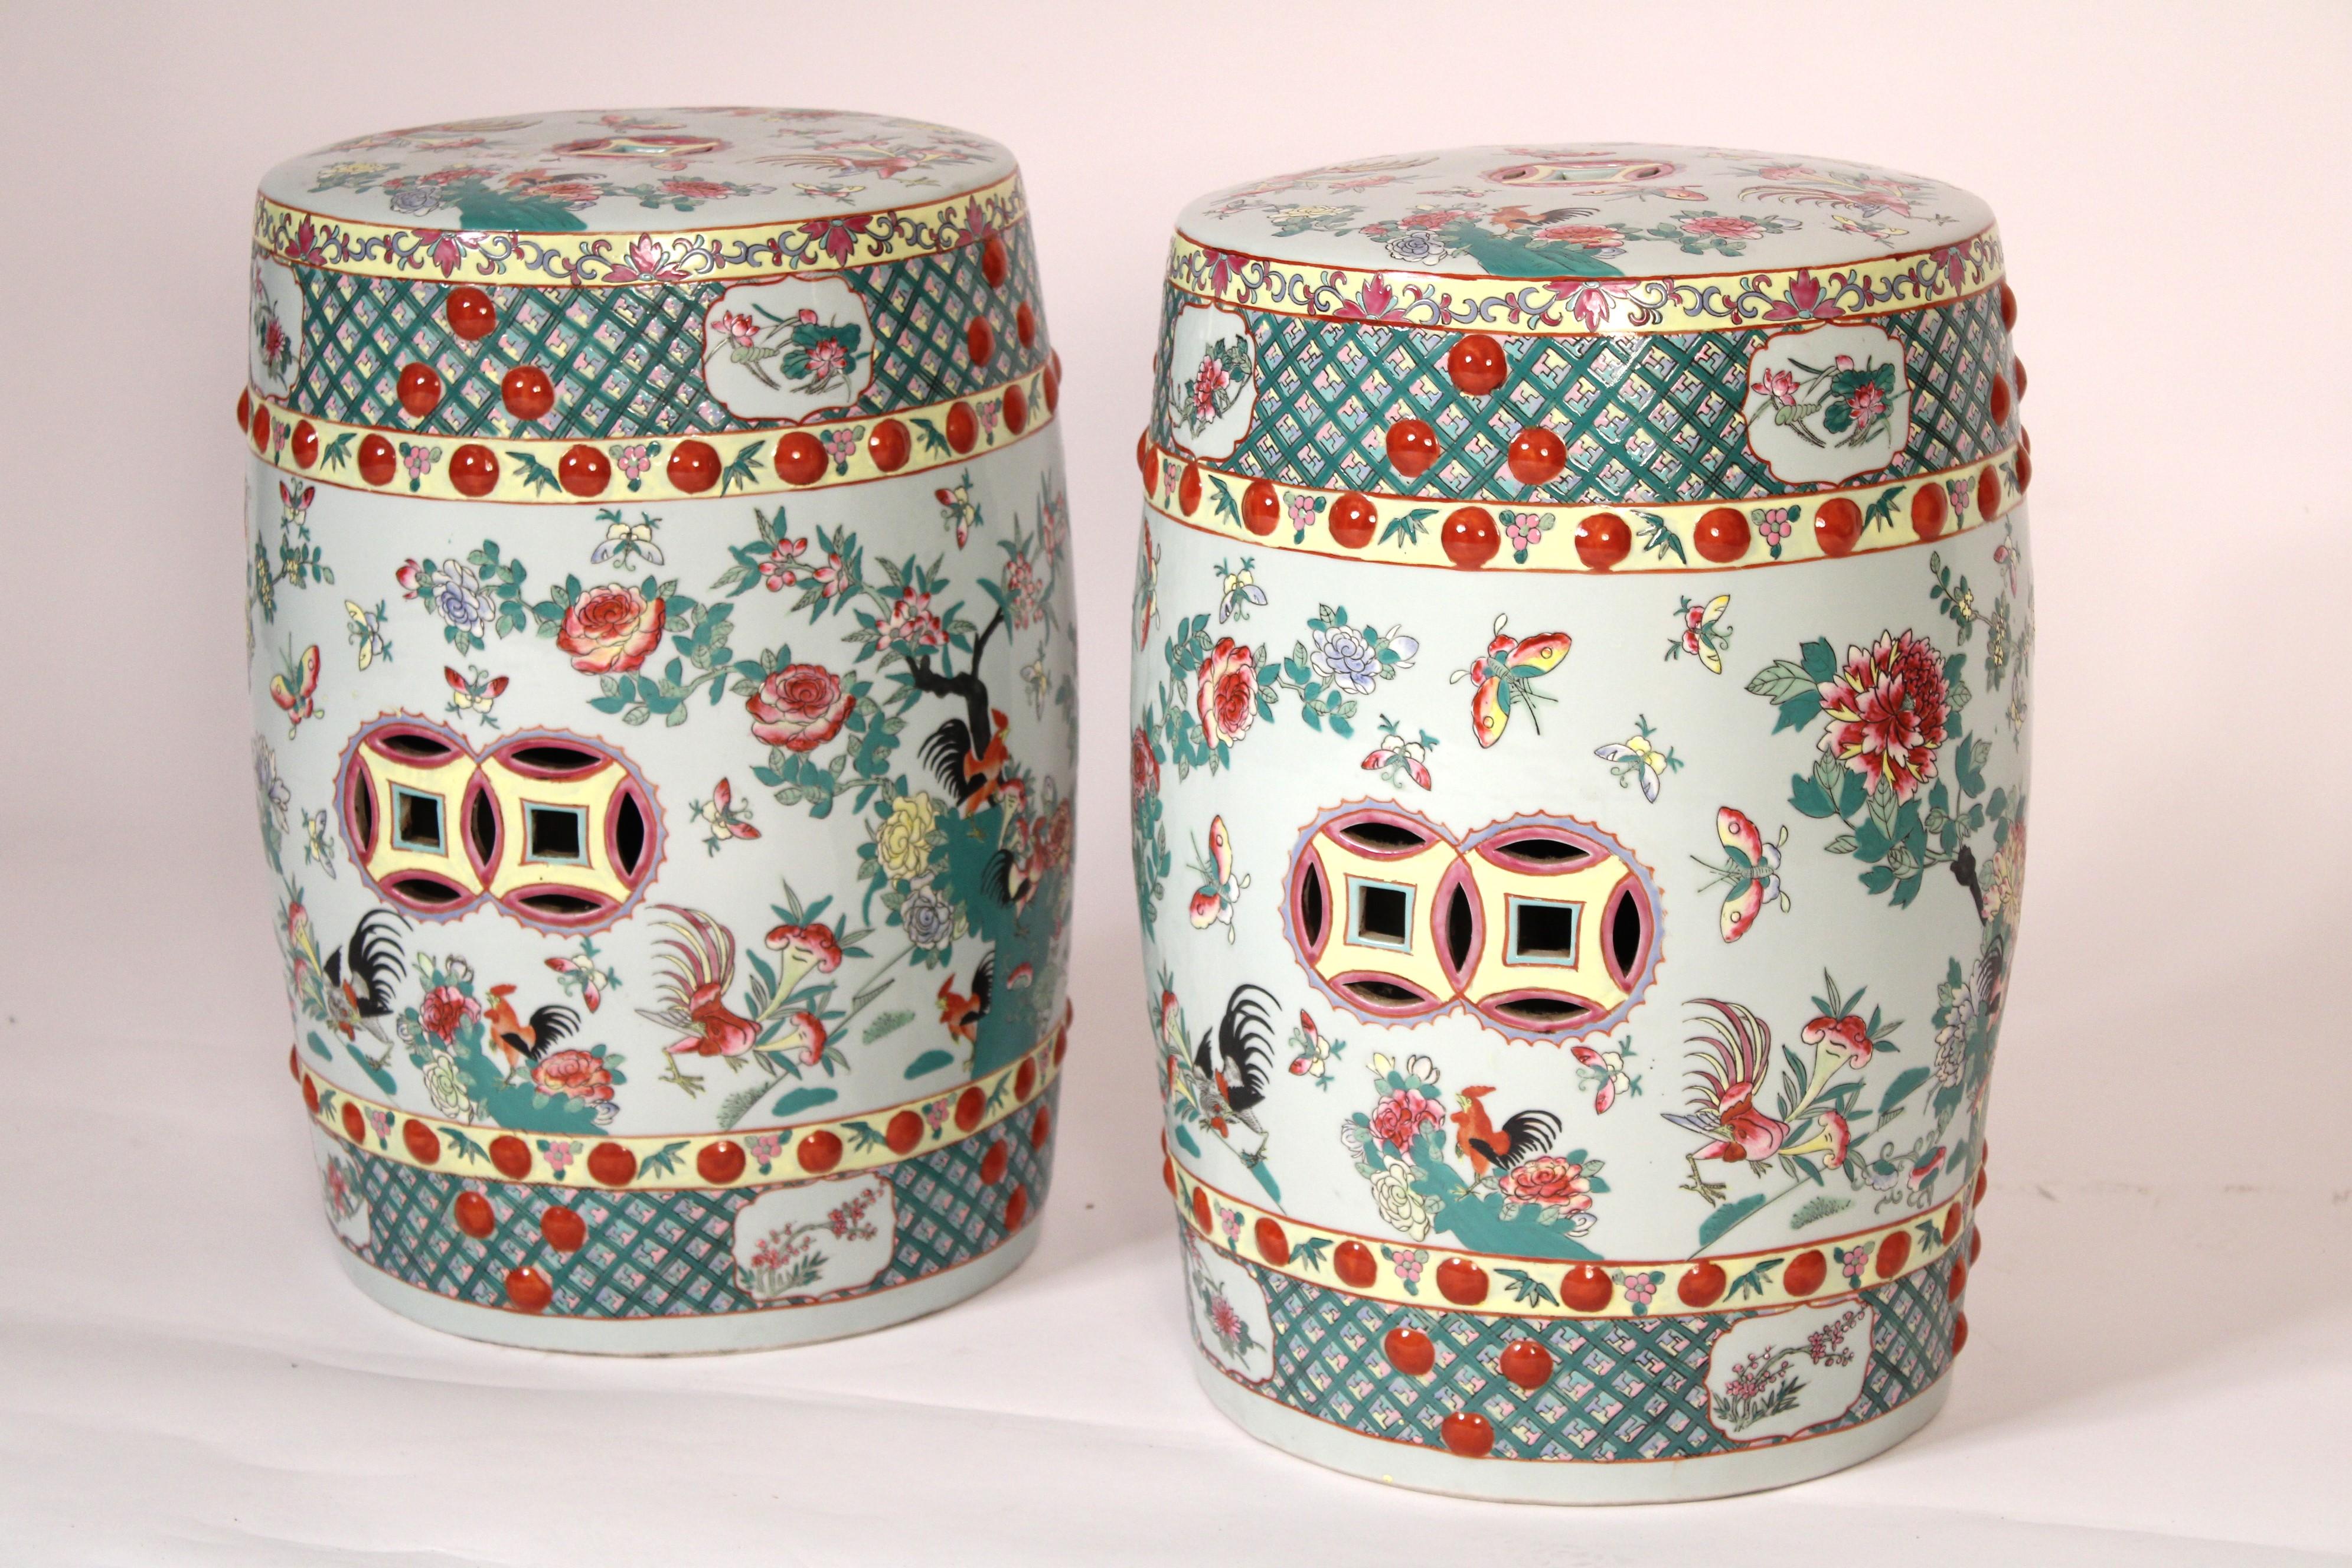 Pair of Chinese polychrome decorated porcelain garden seats, late 20th century.